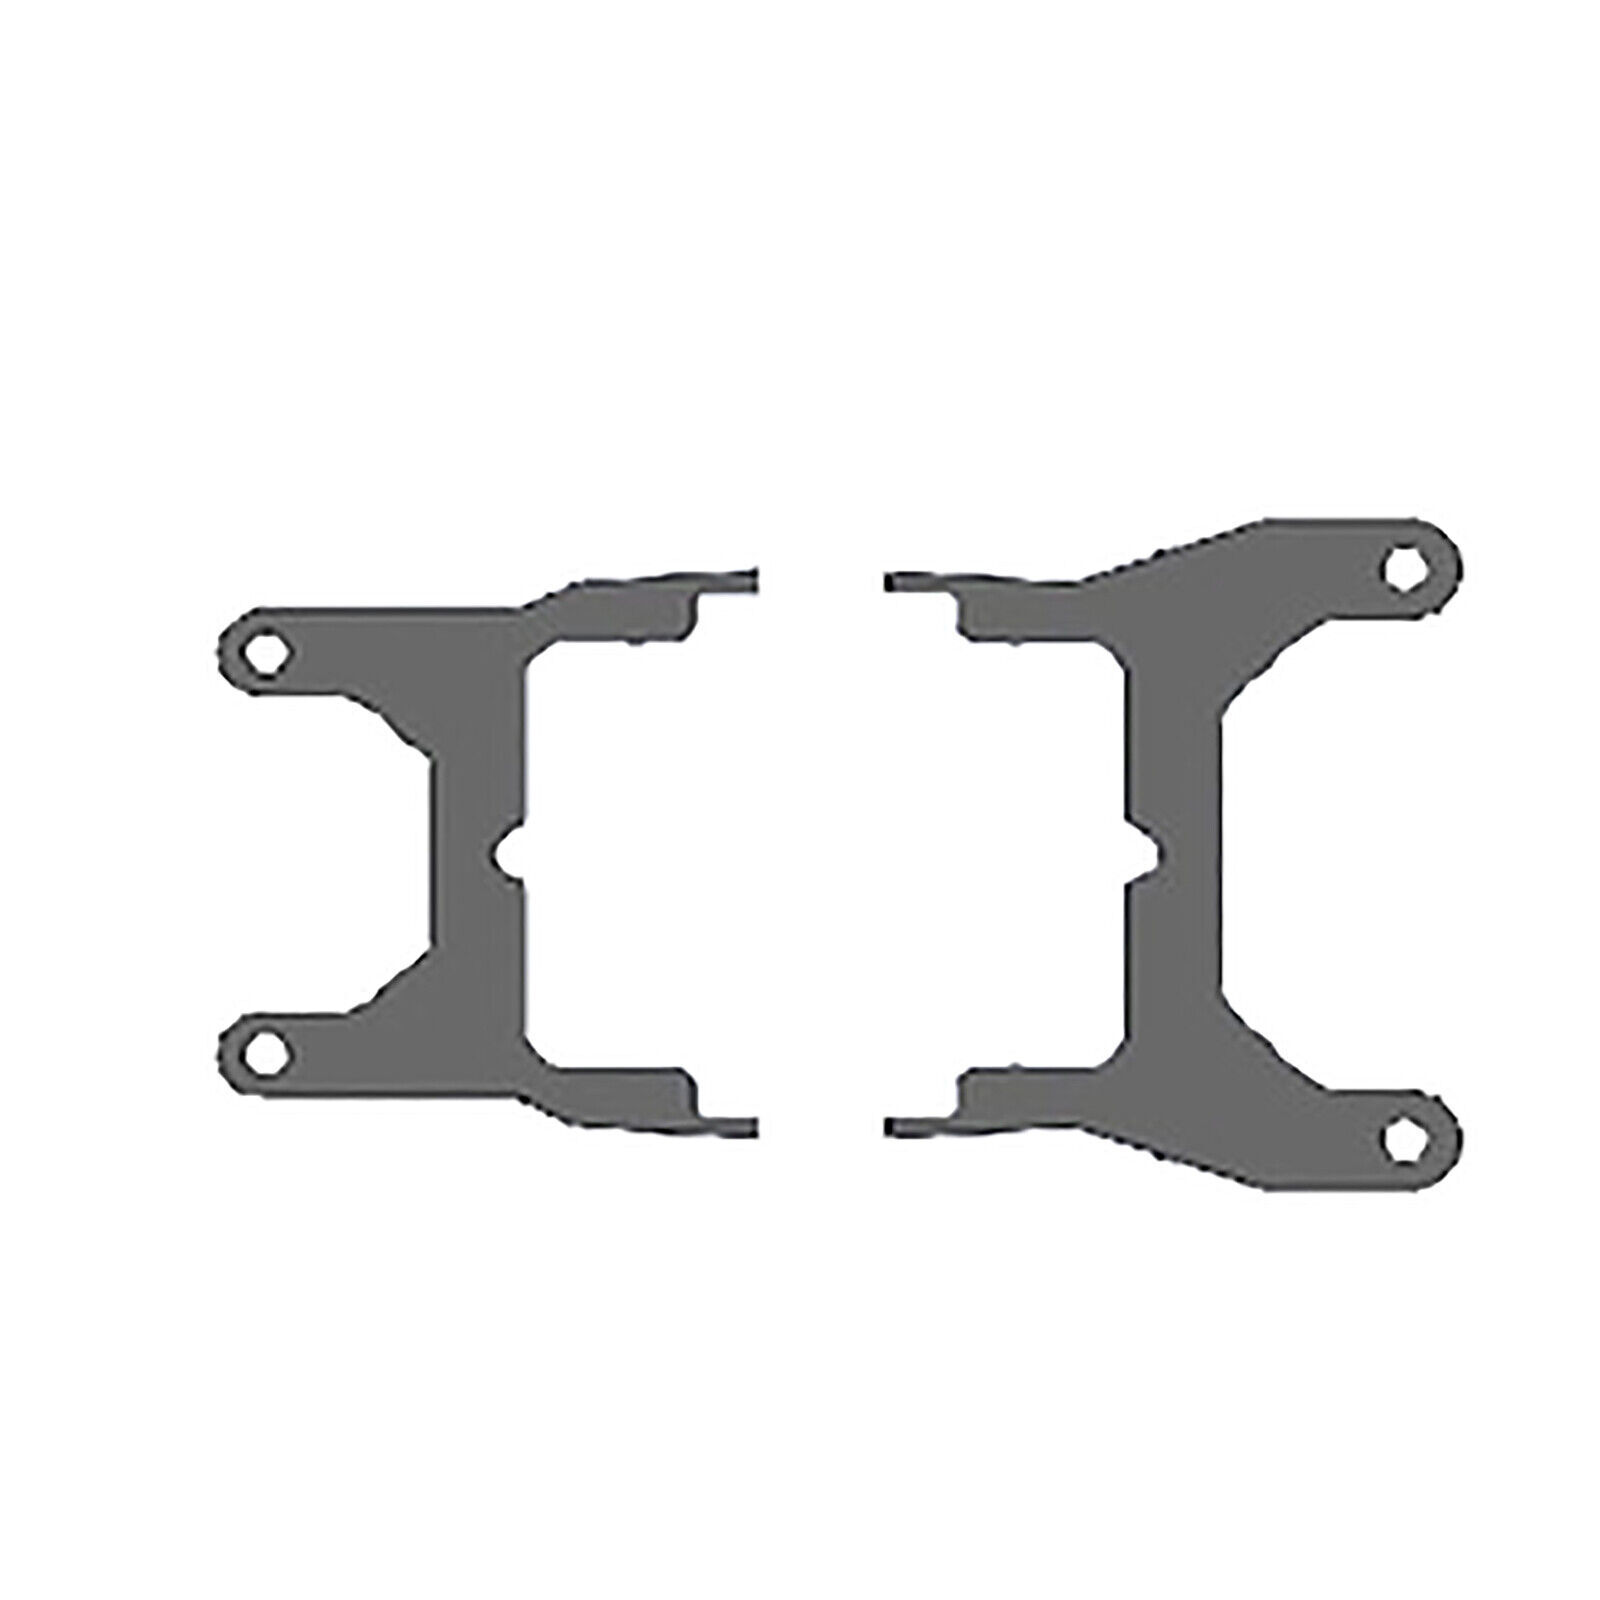 For Corsair Hydro Series H60 H100i H115i H150i Mounting Bracket Buckle Hardware